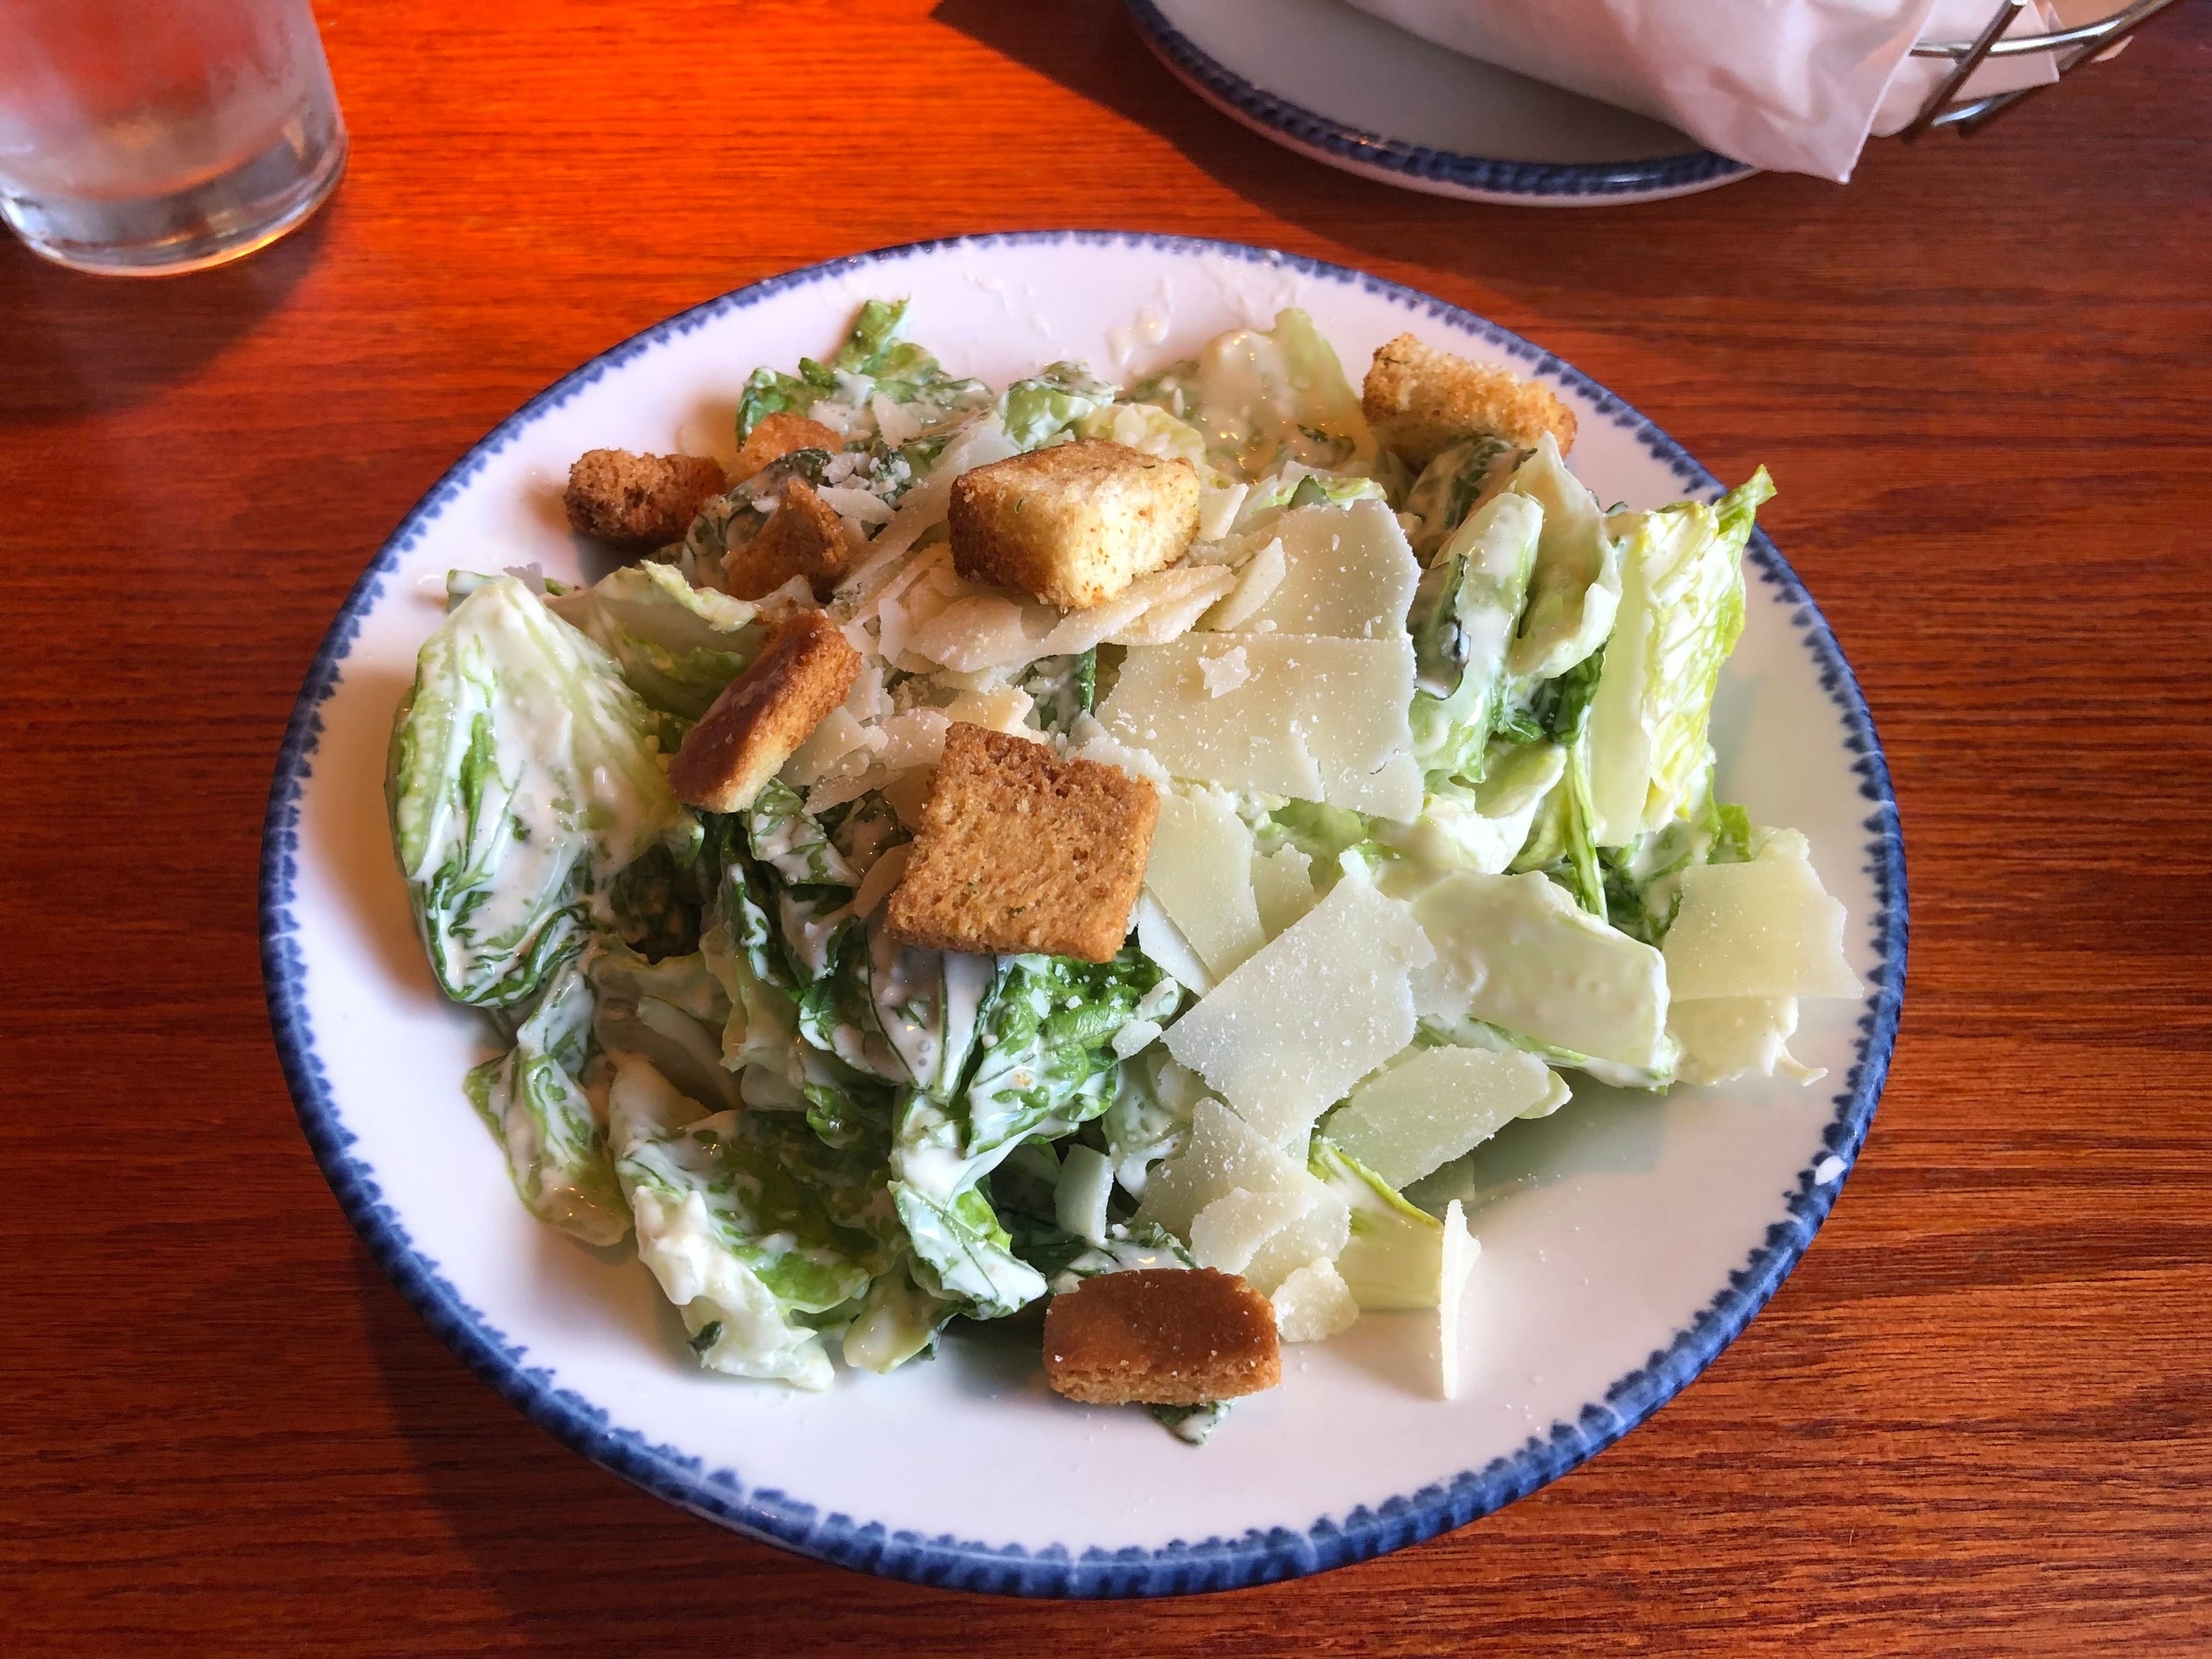 large side salad from Red Lobster